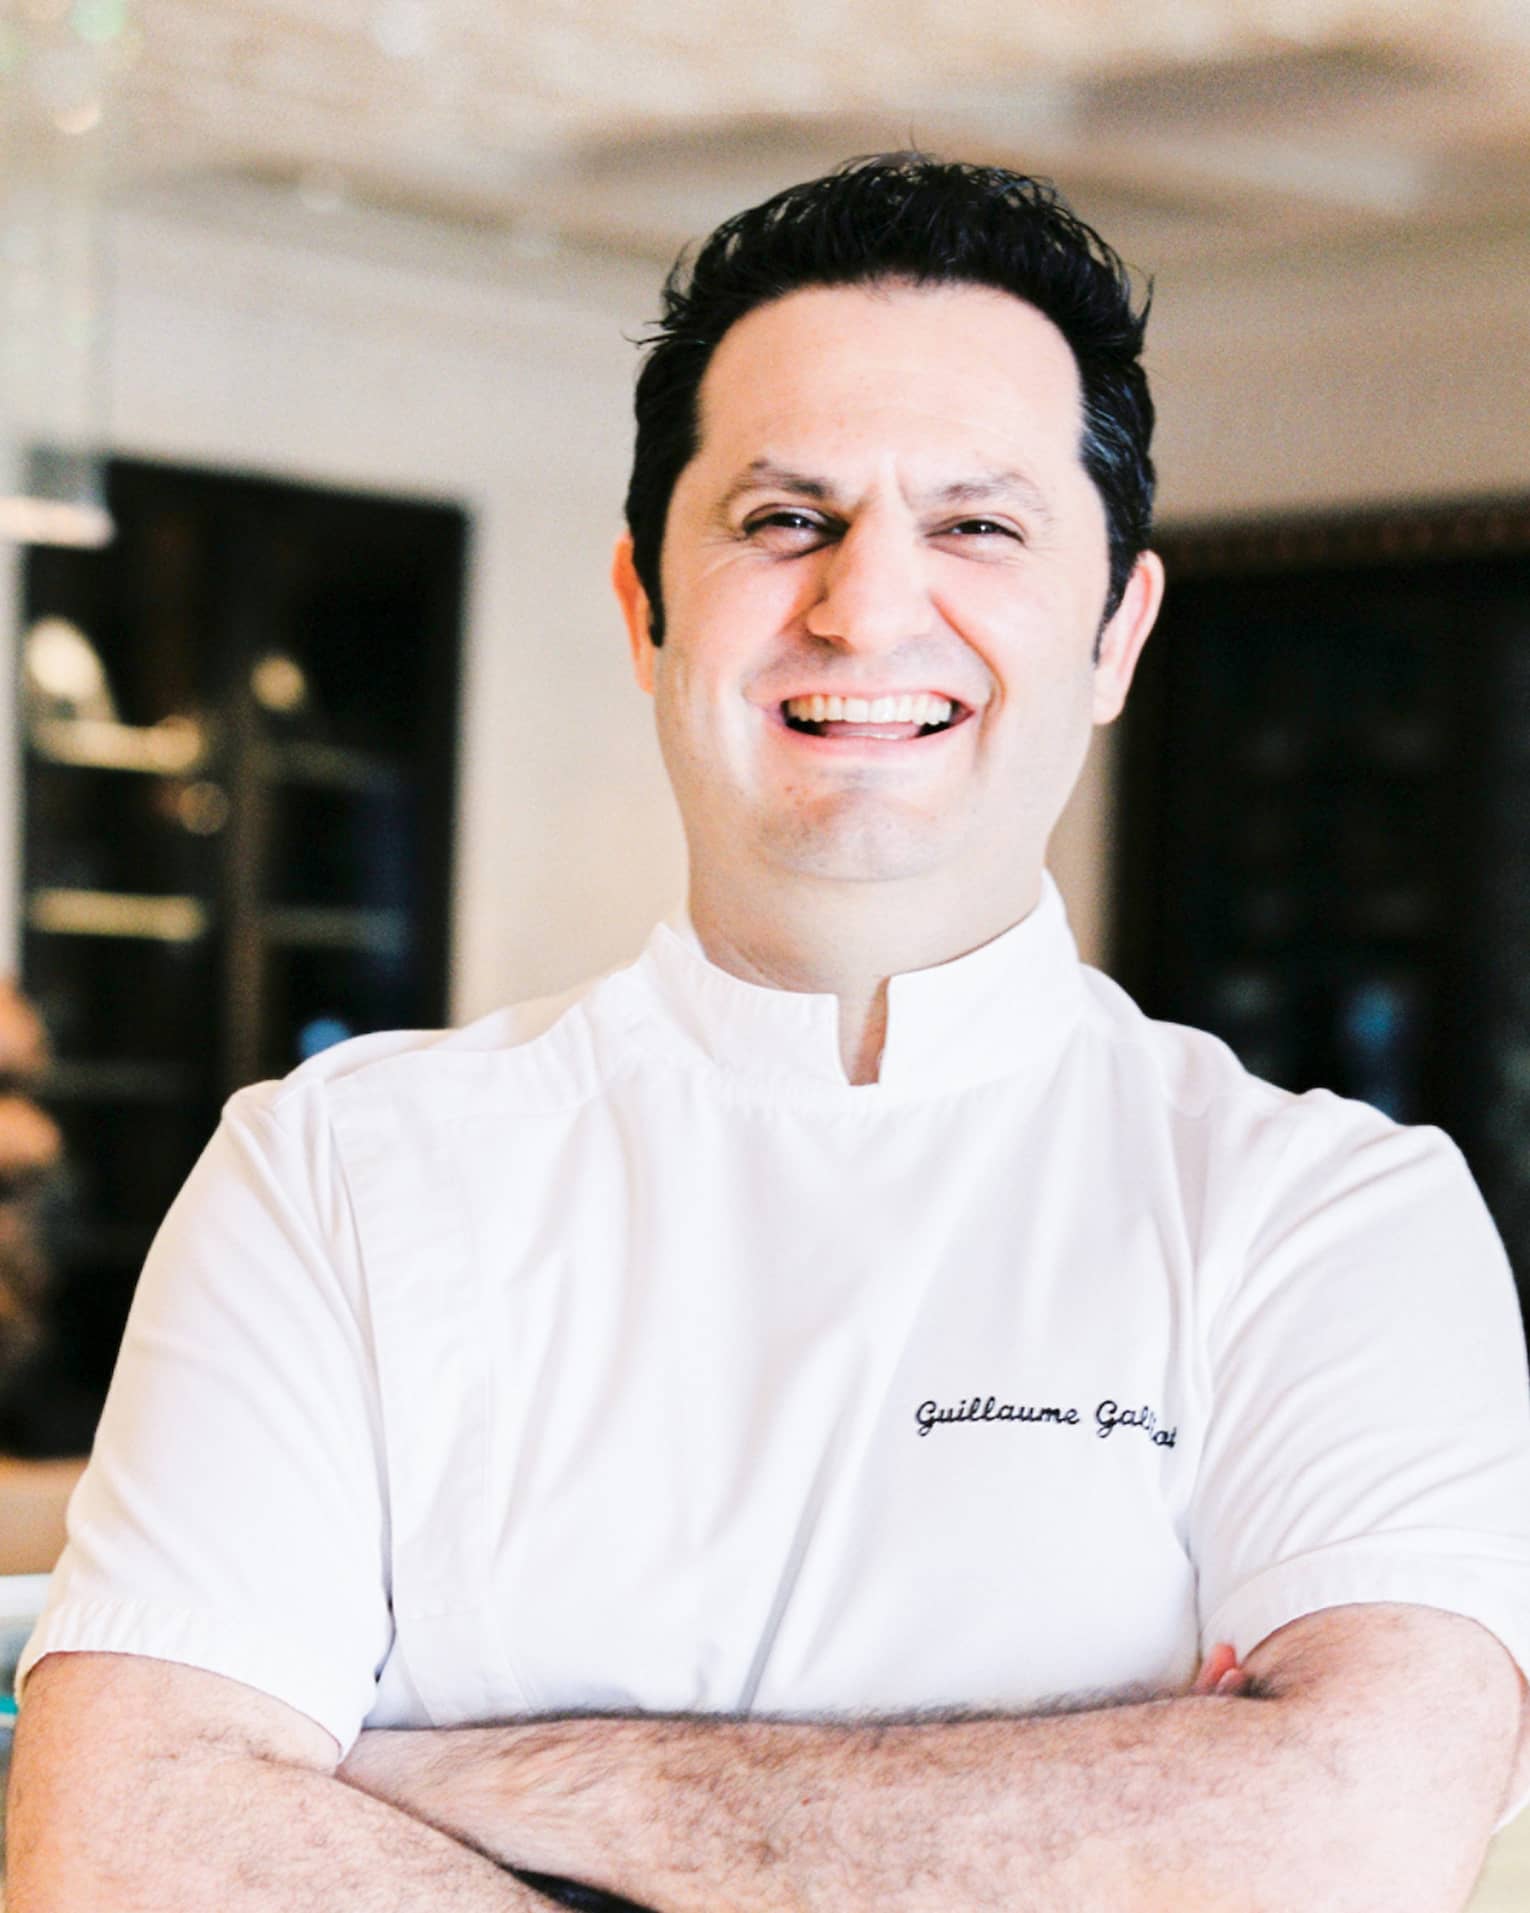 Portrait photo of Chef Guillaume Galliot in uniform and crossing arms